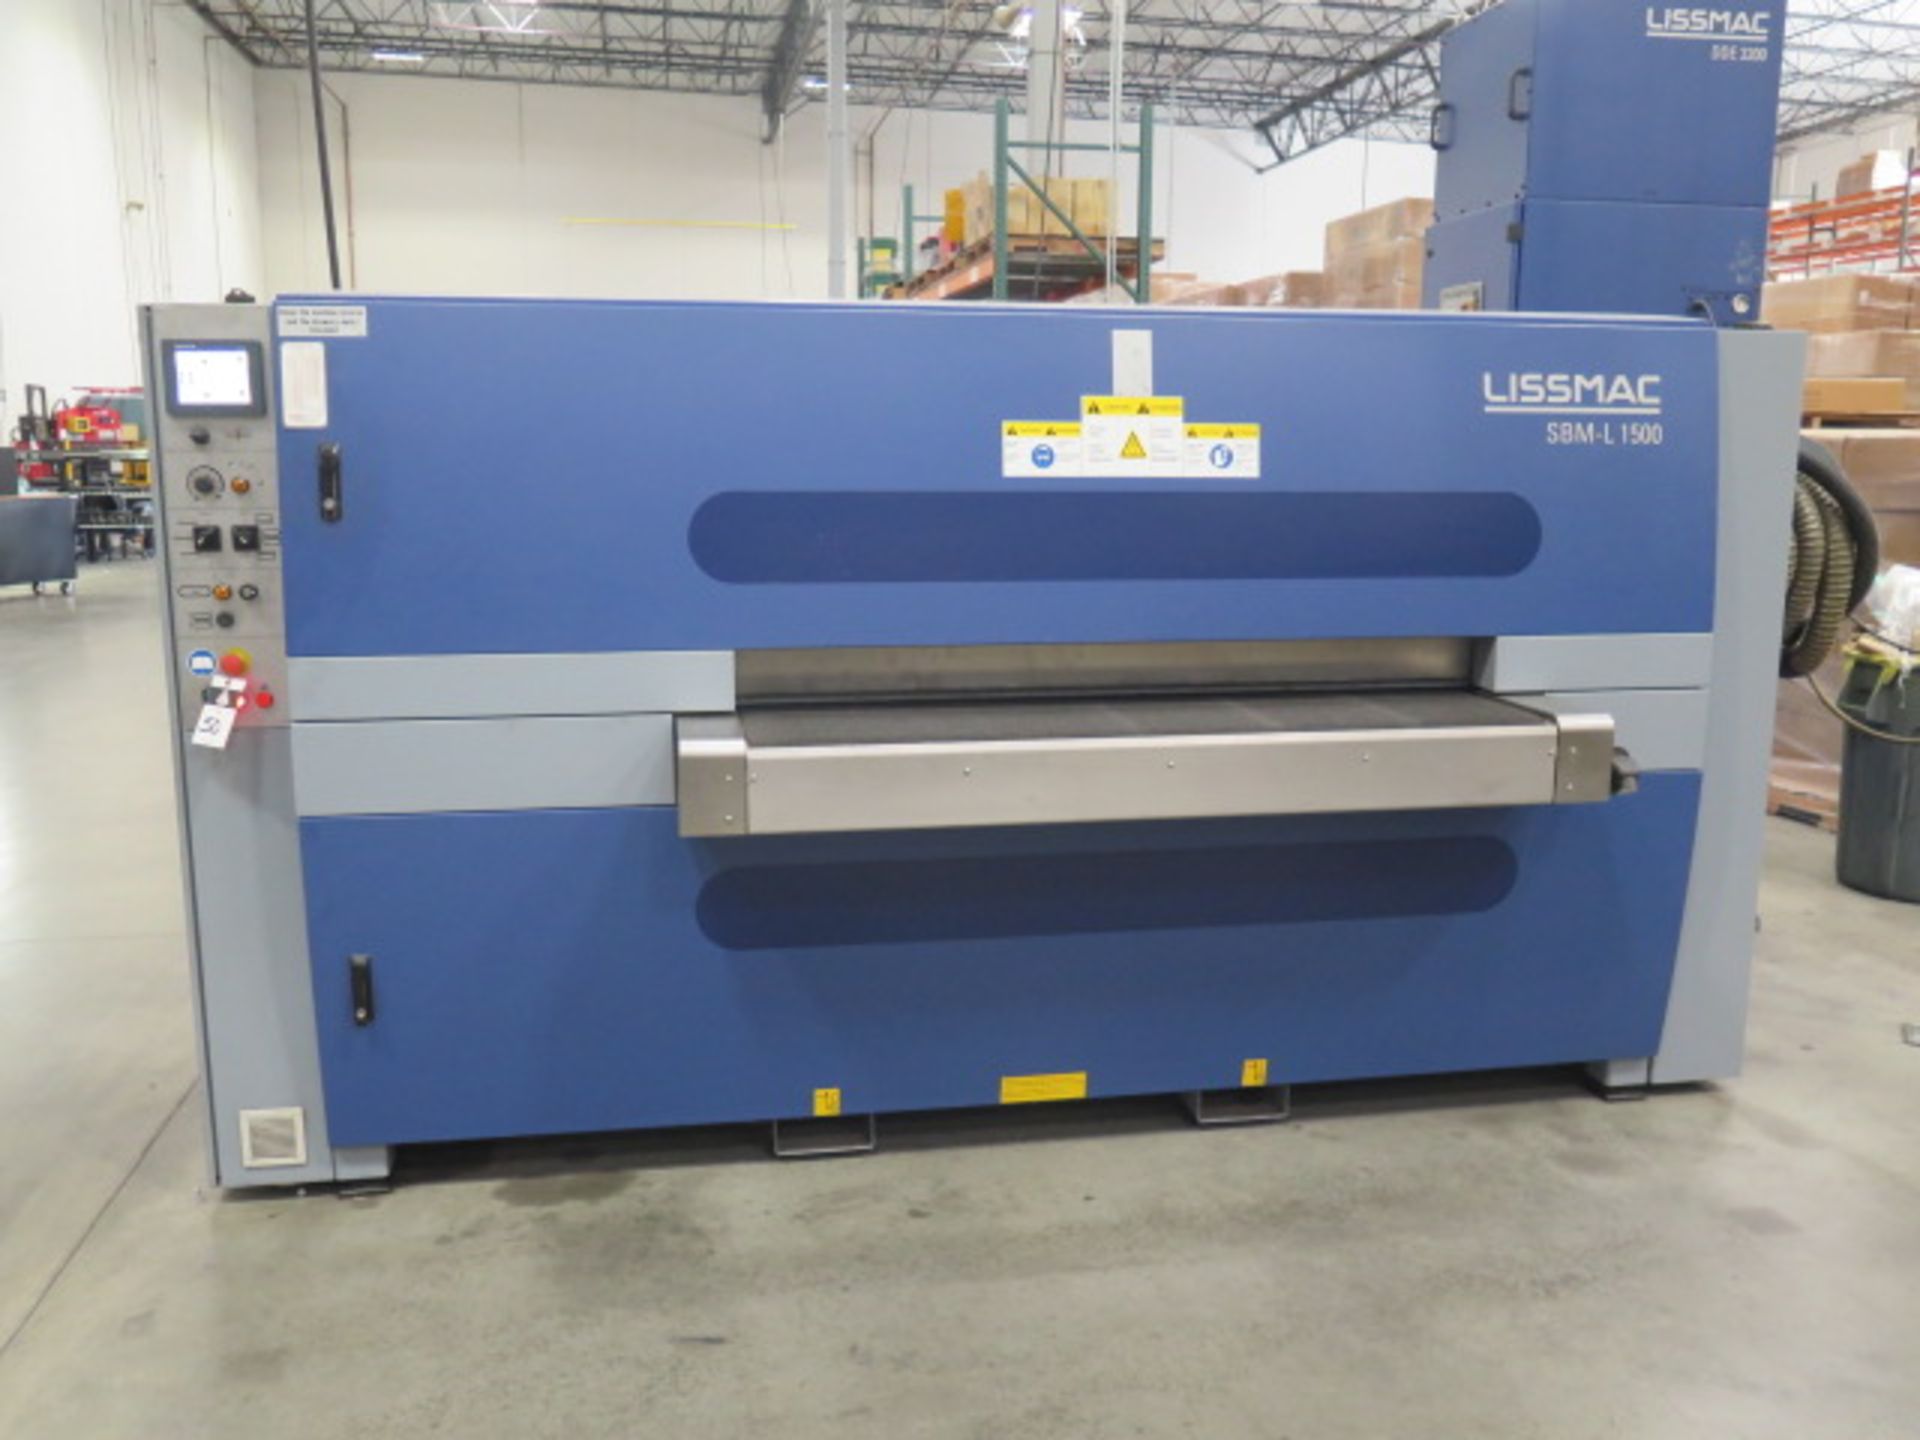 2015 Lissmac SBM-L1500 G1S2-60 2-Sided Deburring and Edge Rounding Machine s/n 004475, SOLD AS IS